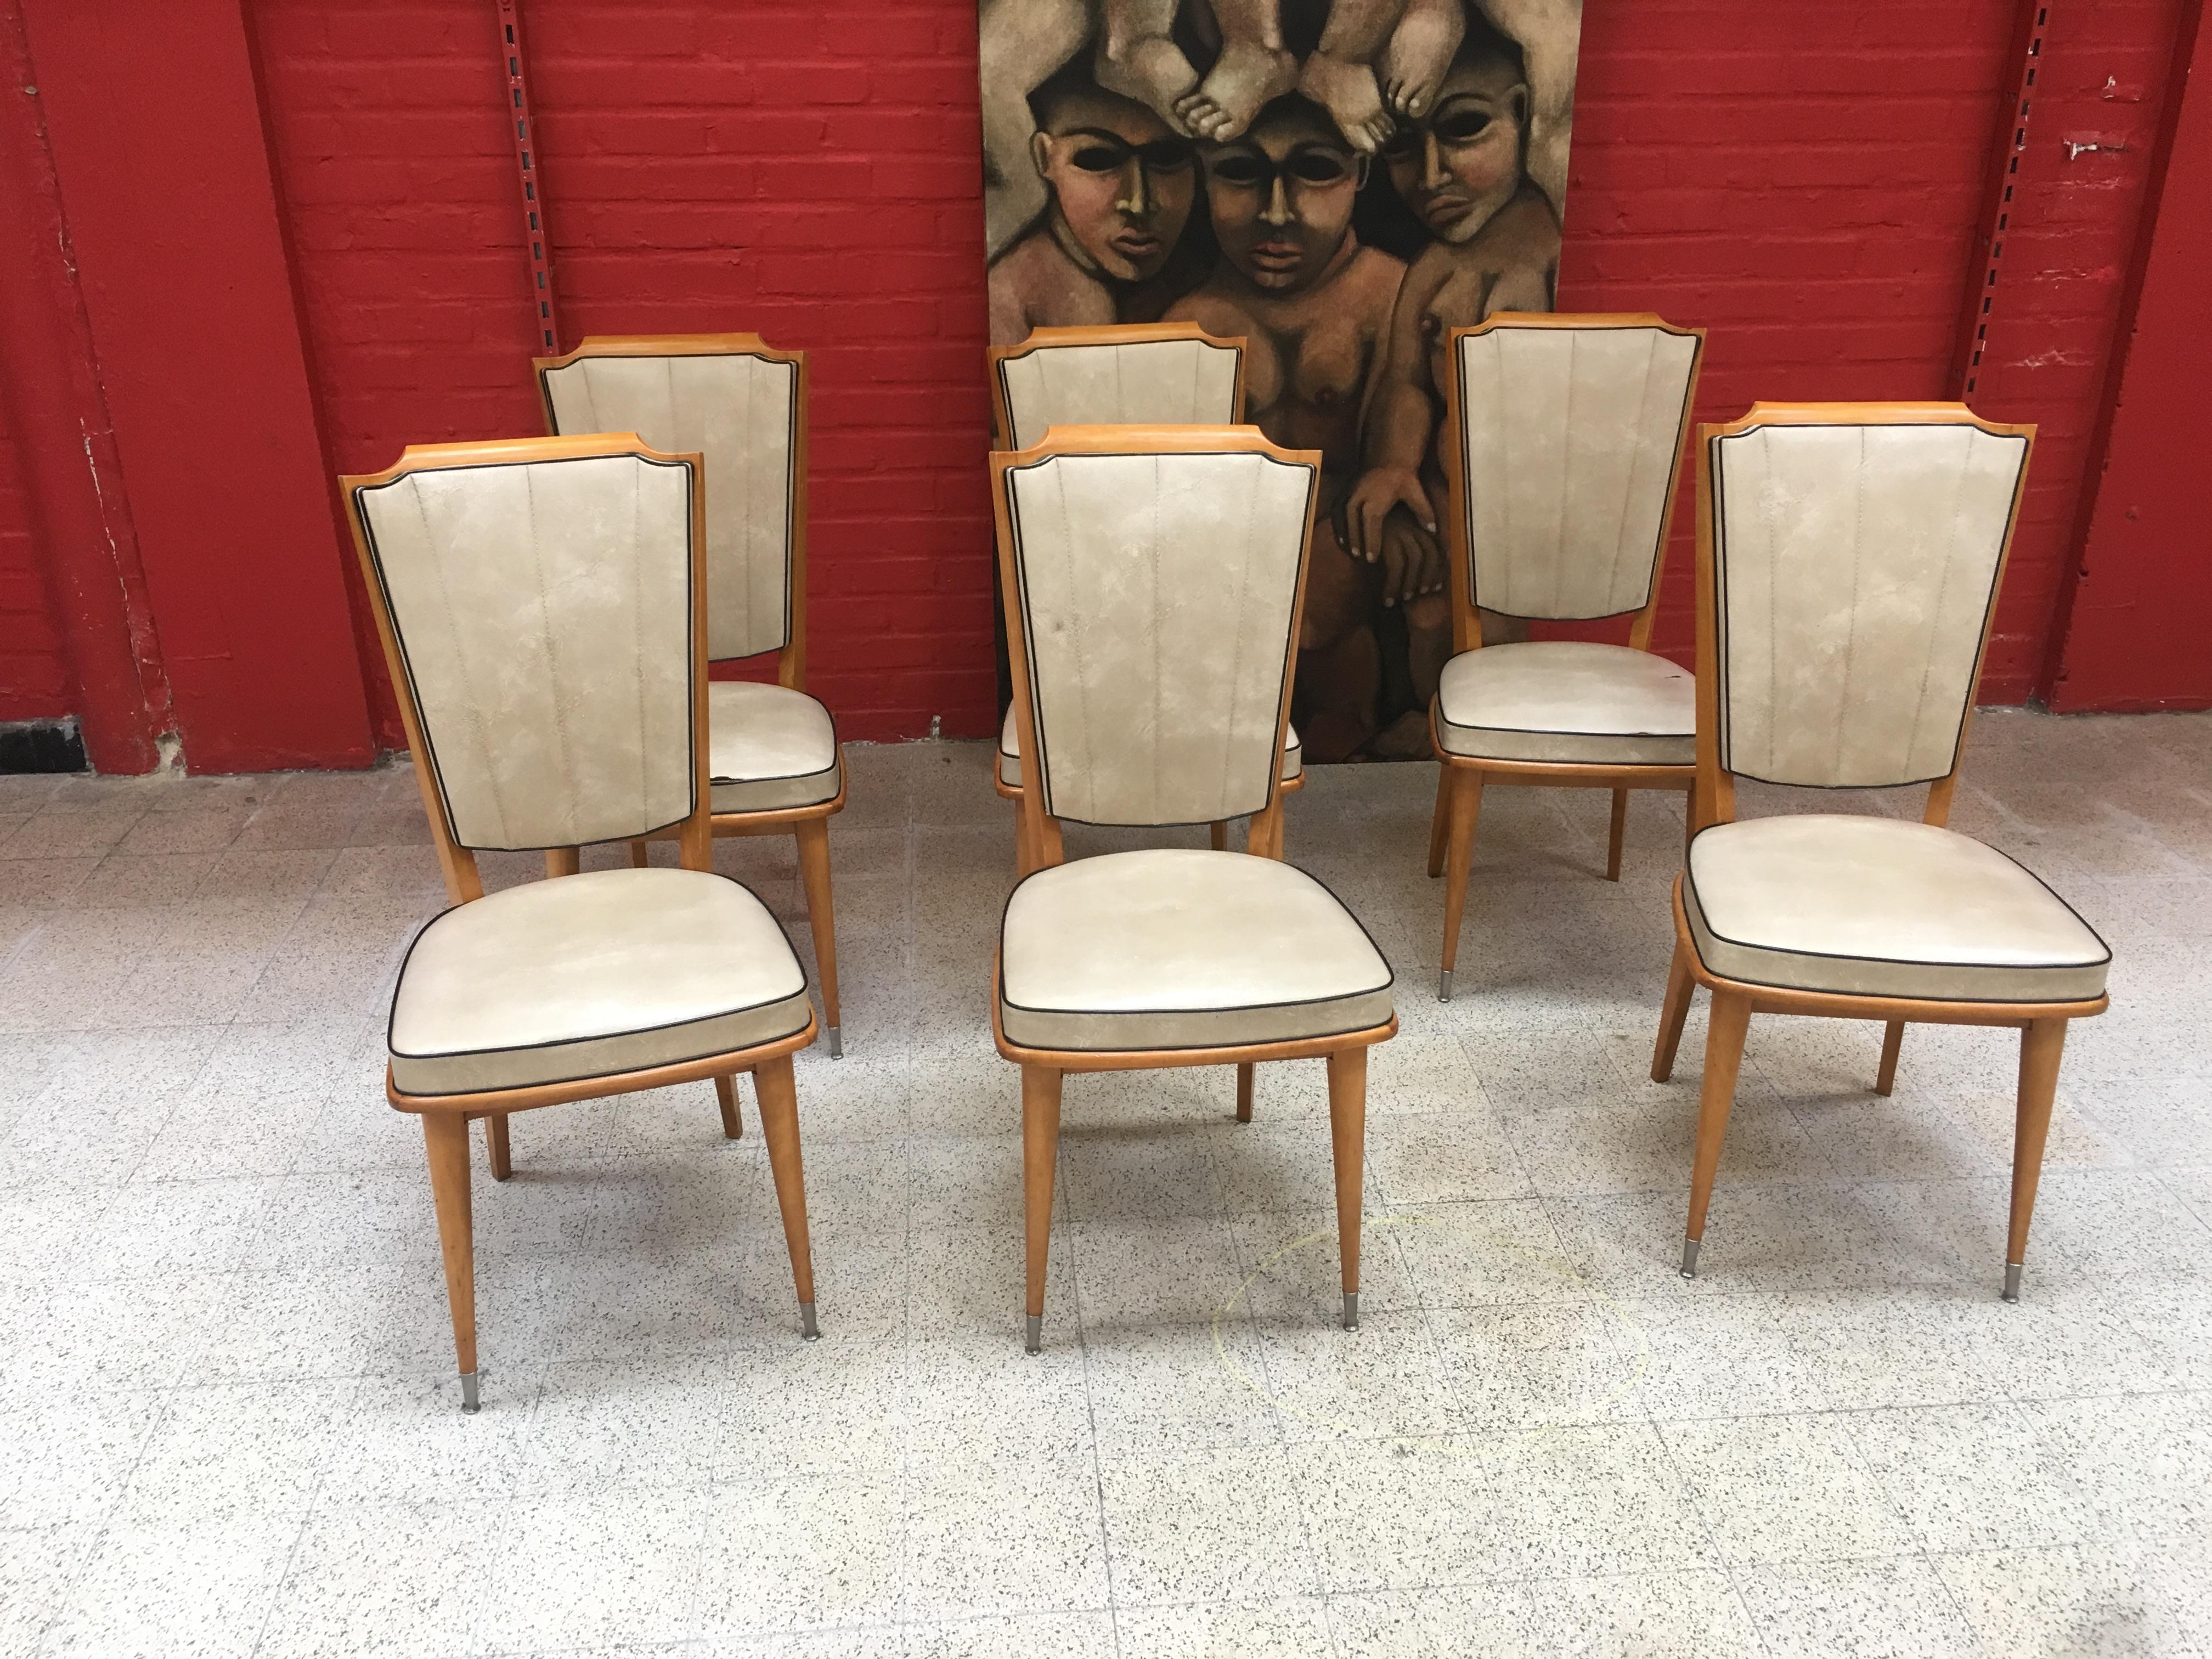 6 typical french chairs 1960
to be restored.